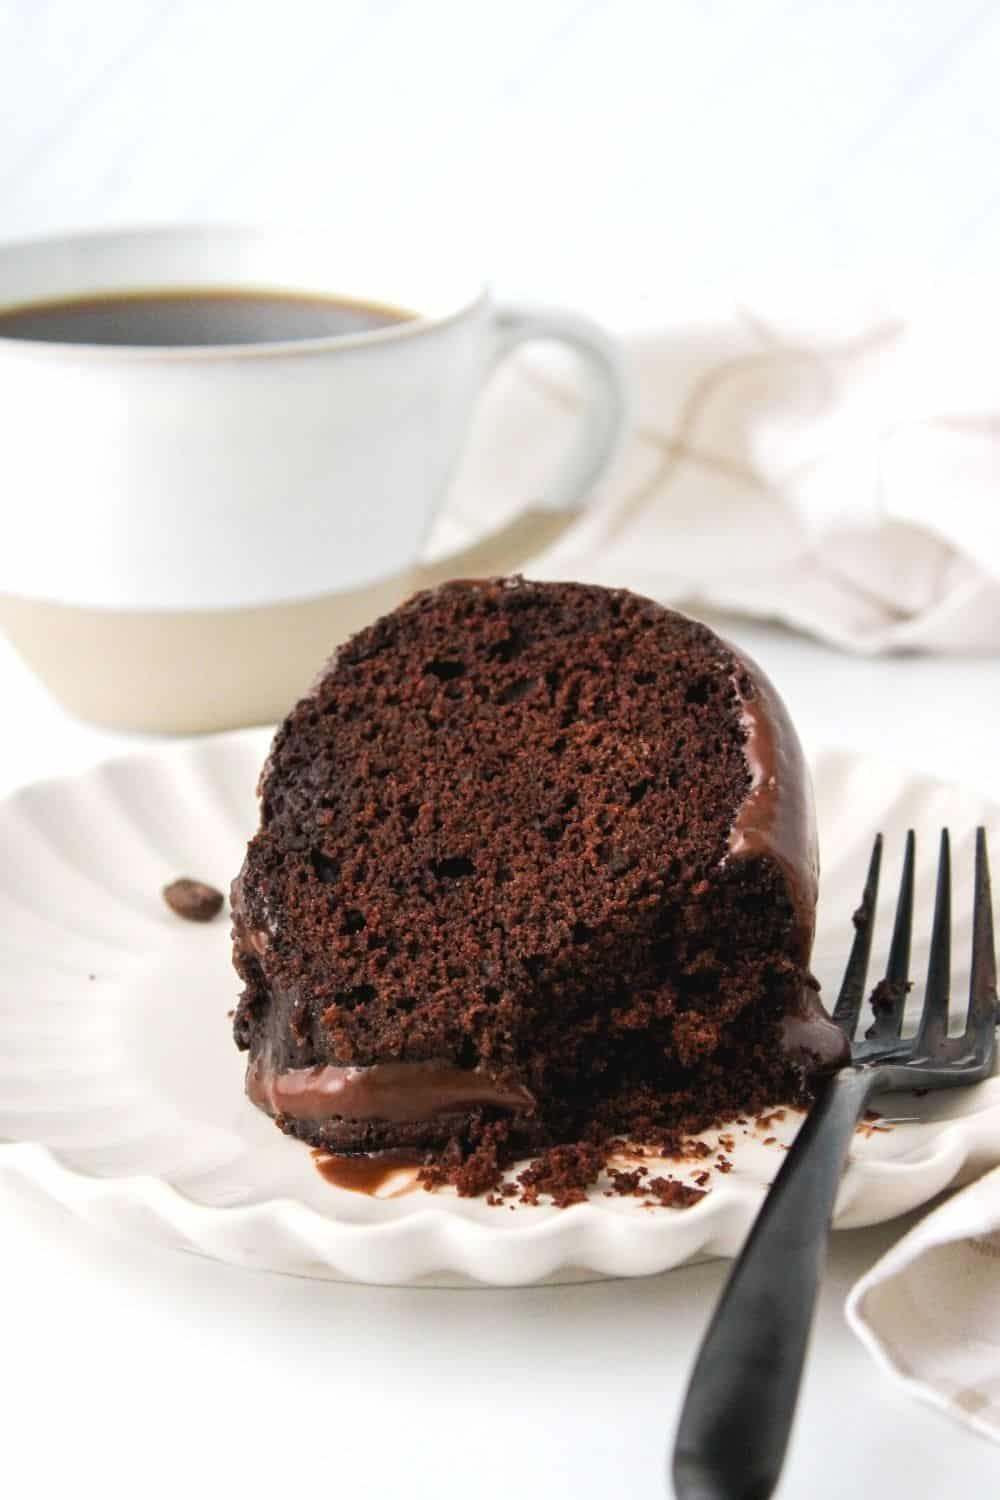 slice of chocolate fudge cake on a white plate, with a cup of coffee in the background